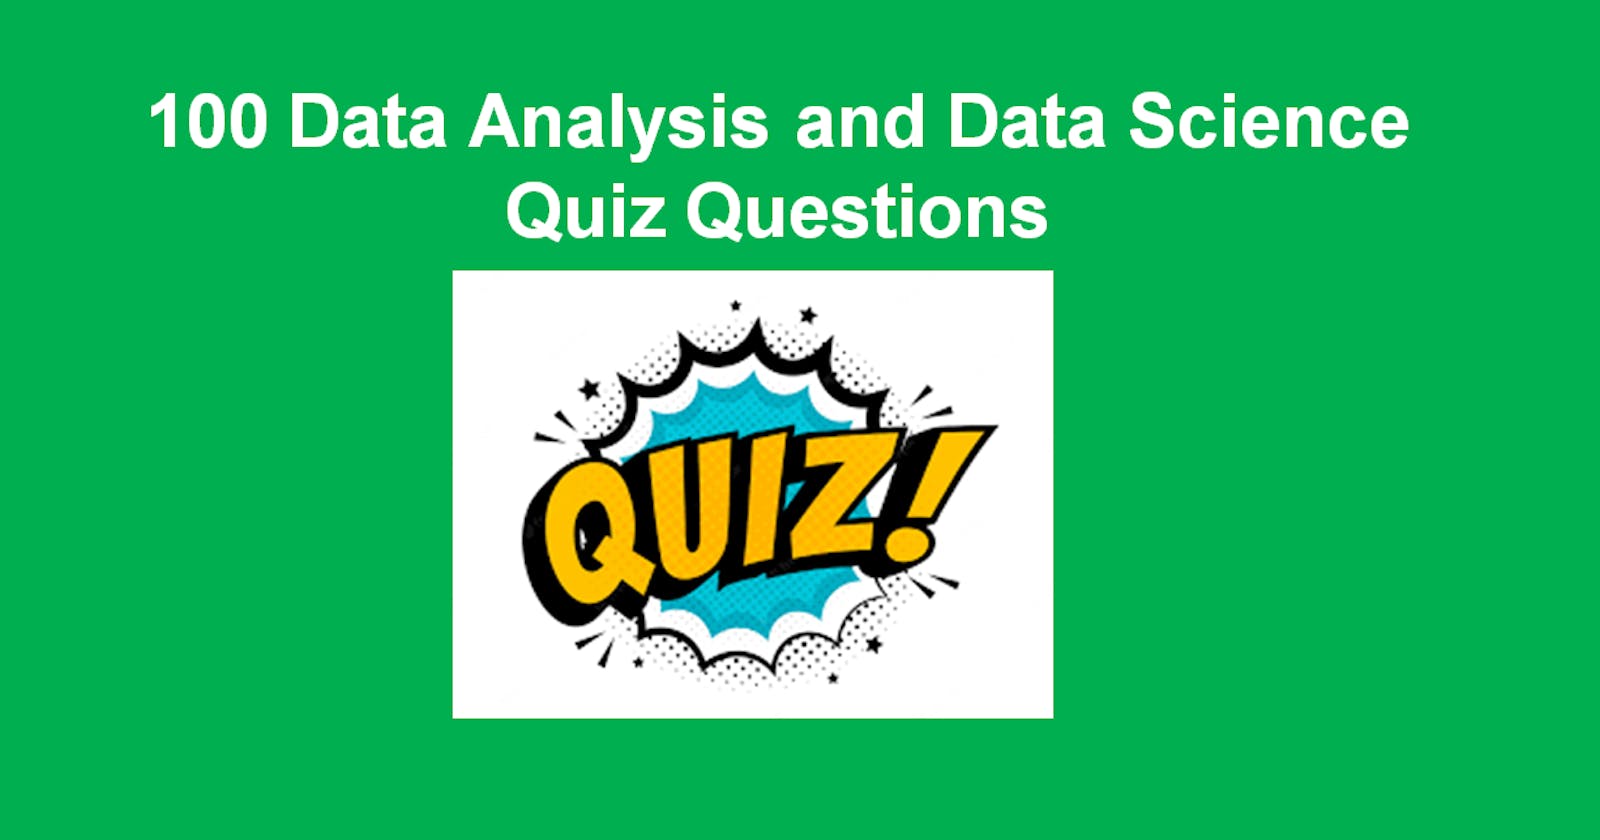 100 Questions that will help you Smash your Data Analysis and Data Science Job Interviews